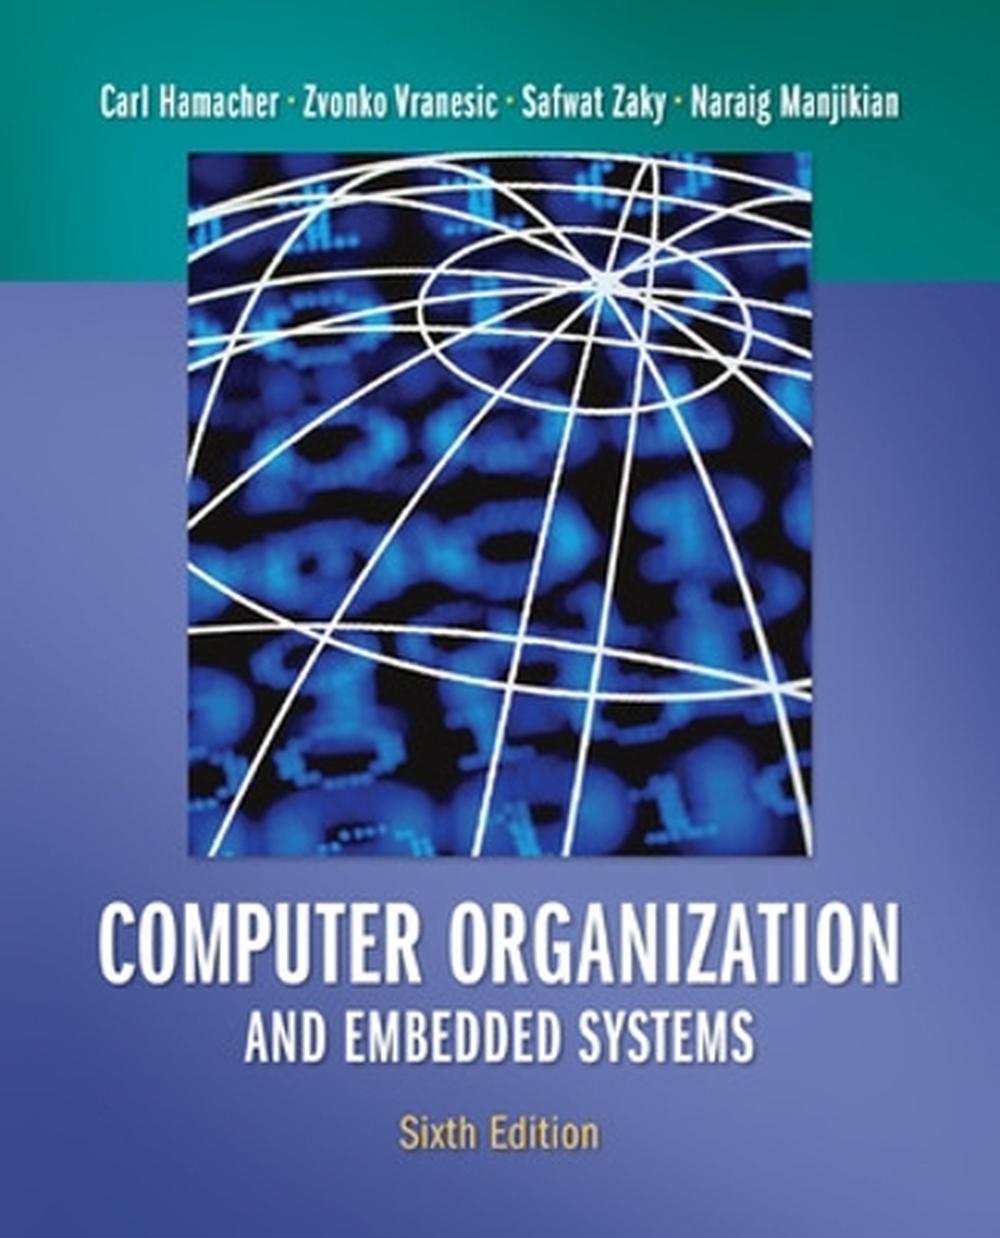 Computer Organization and Embedded Systems 6th Edition by Carl Hamacher